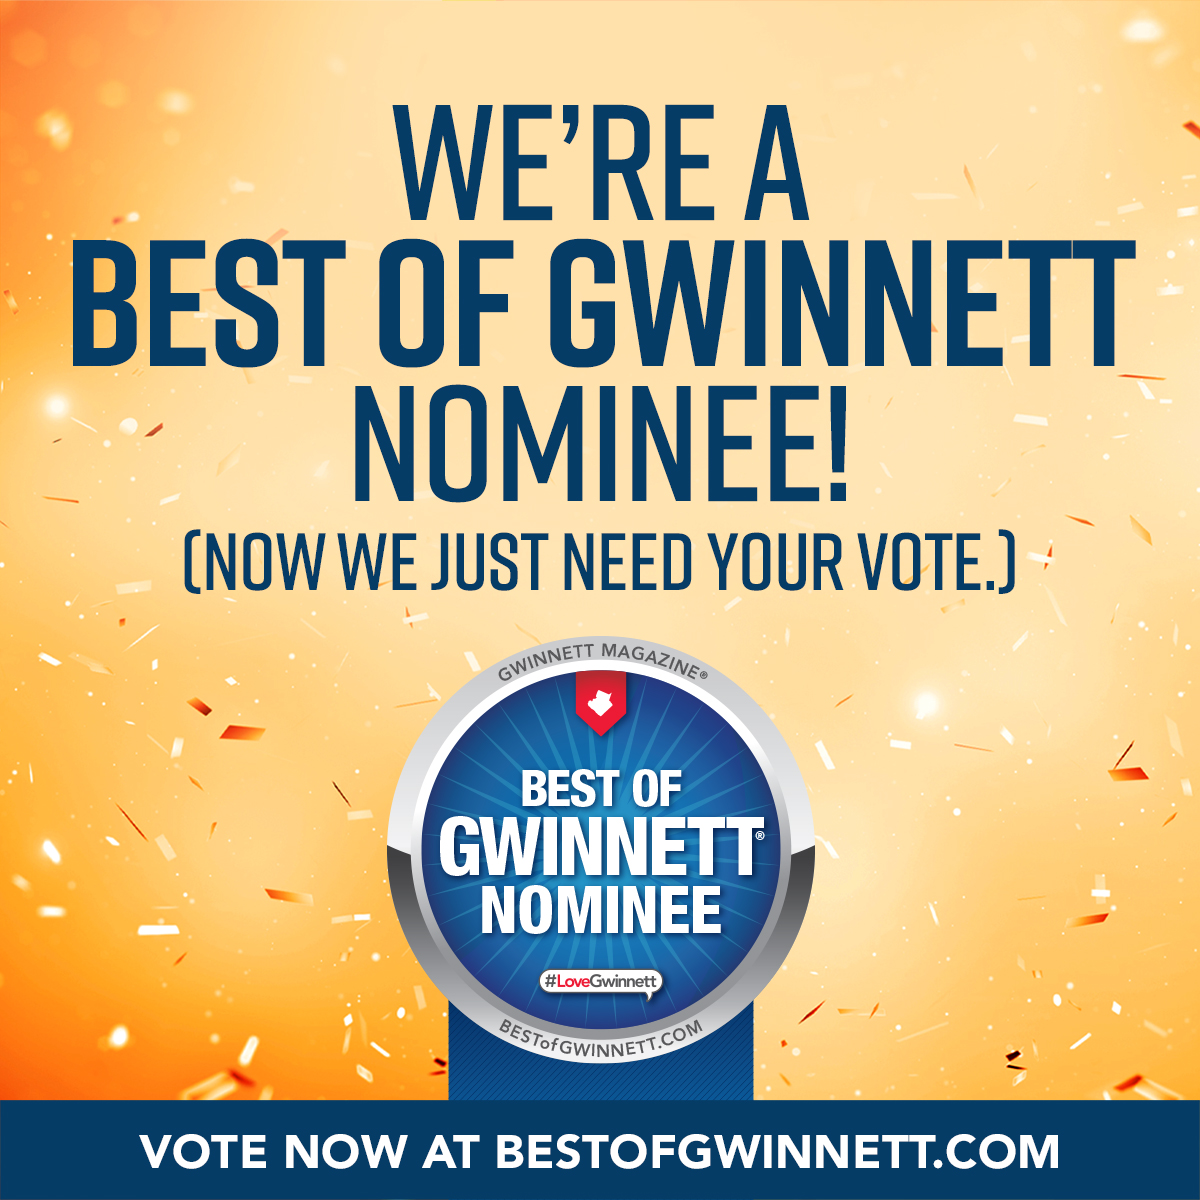 we're a best of gwinnett nominee! now we just need your vote vote now at bestofgwinnett.com